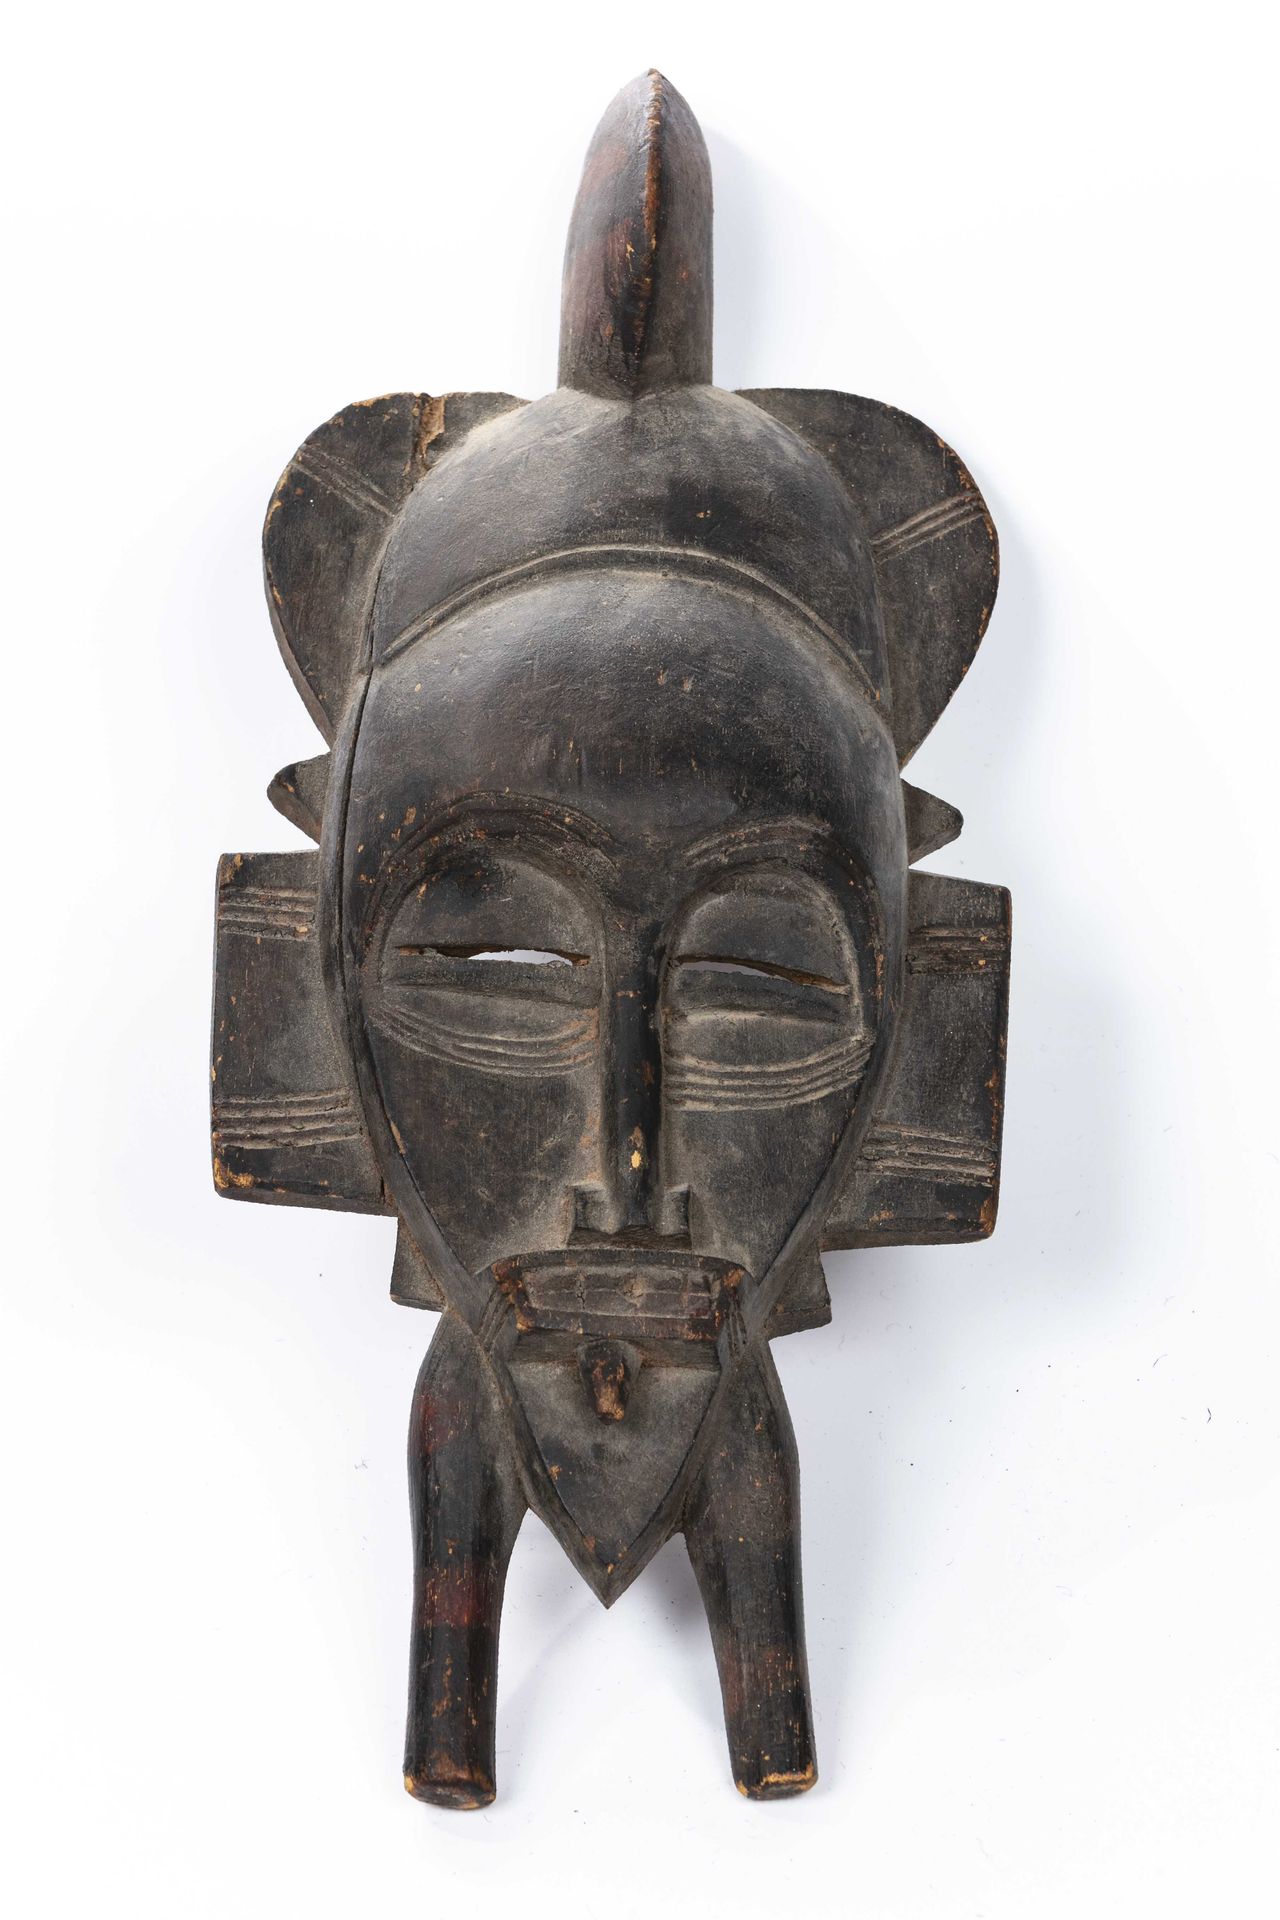 Null Senoufo style mask Ivory Coast 
Wood 
Height : 42 cm 
The face is slightly &hellip;